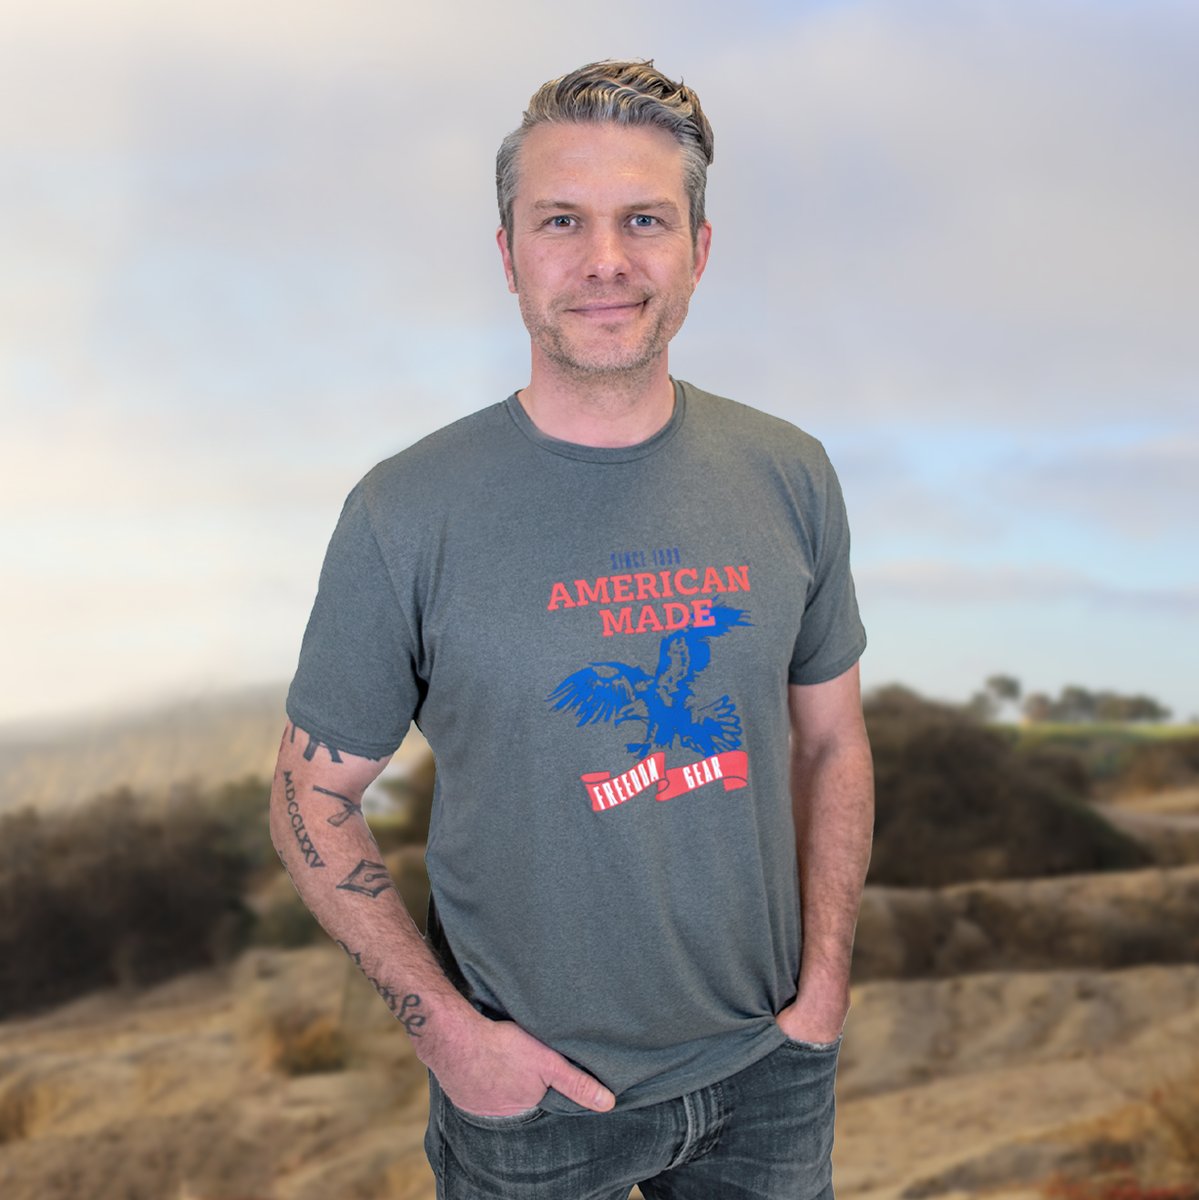 Double up on your American Made Freedom Gear all month long with our BOGO 1/2 off sale! Use code: FREEDOM at checkout. You can shop @PeteHegseth's favorite SoftTech tees at our shop or at the link in our bio! Proudly #MadeInAmerica Real People. Real Products.